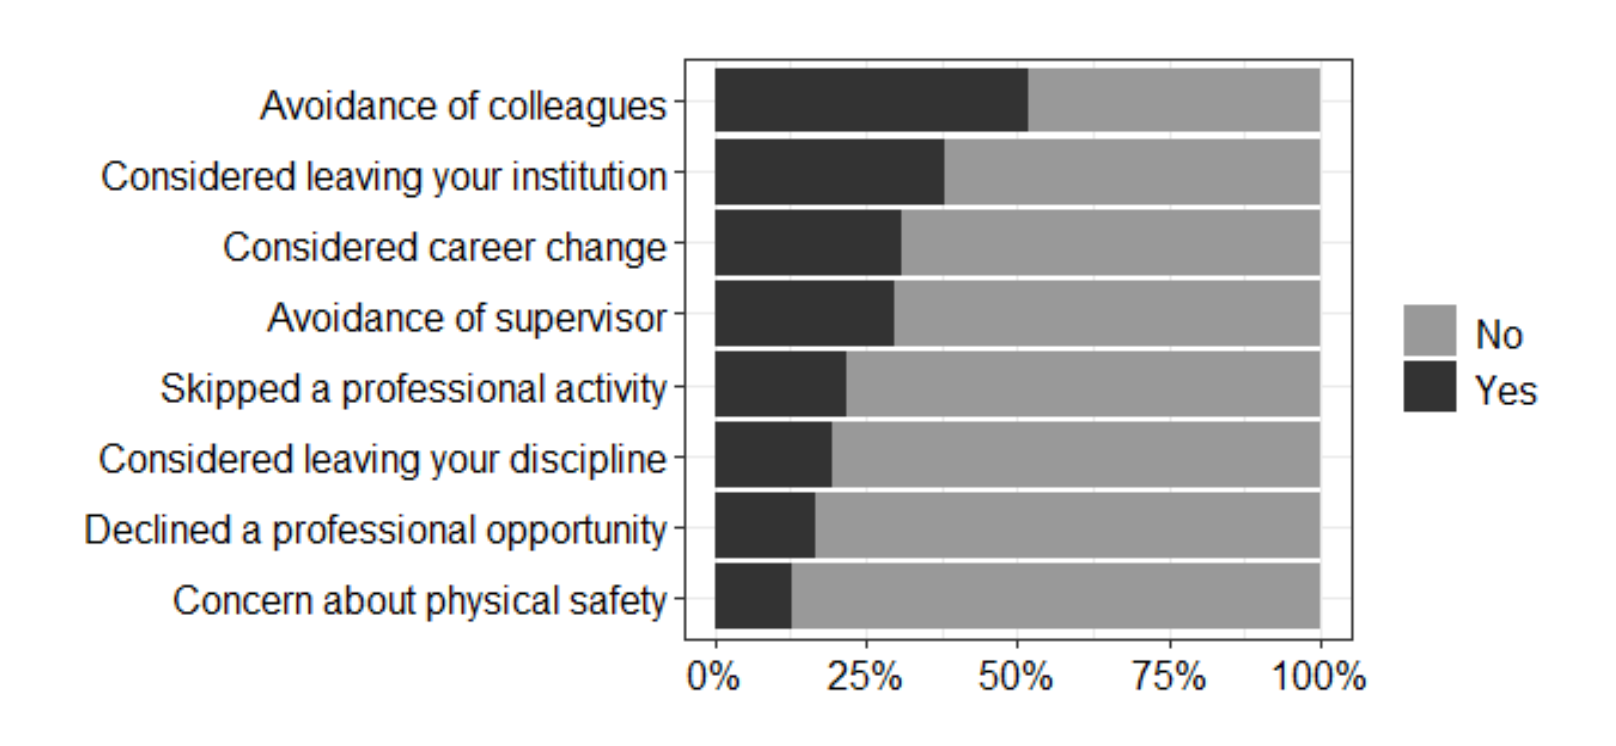 Chart of selection of professional outcomes and consequences ranked in order of most commonly reported in a workplace climate survey of geoscientists. 